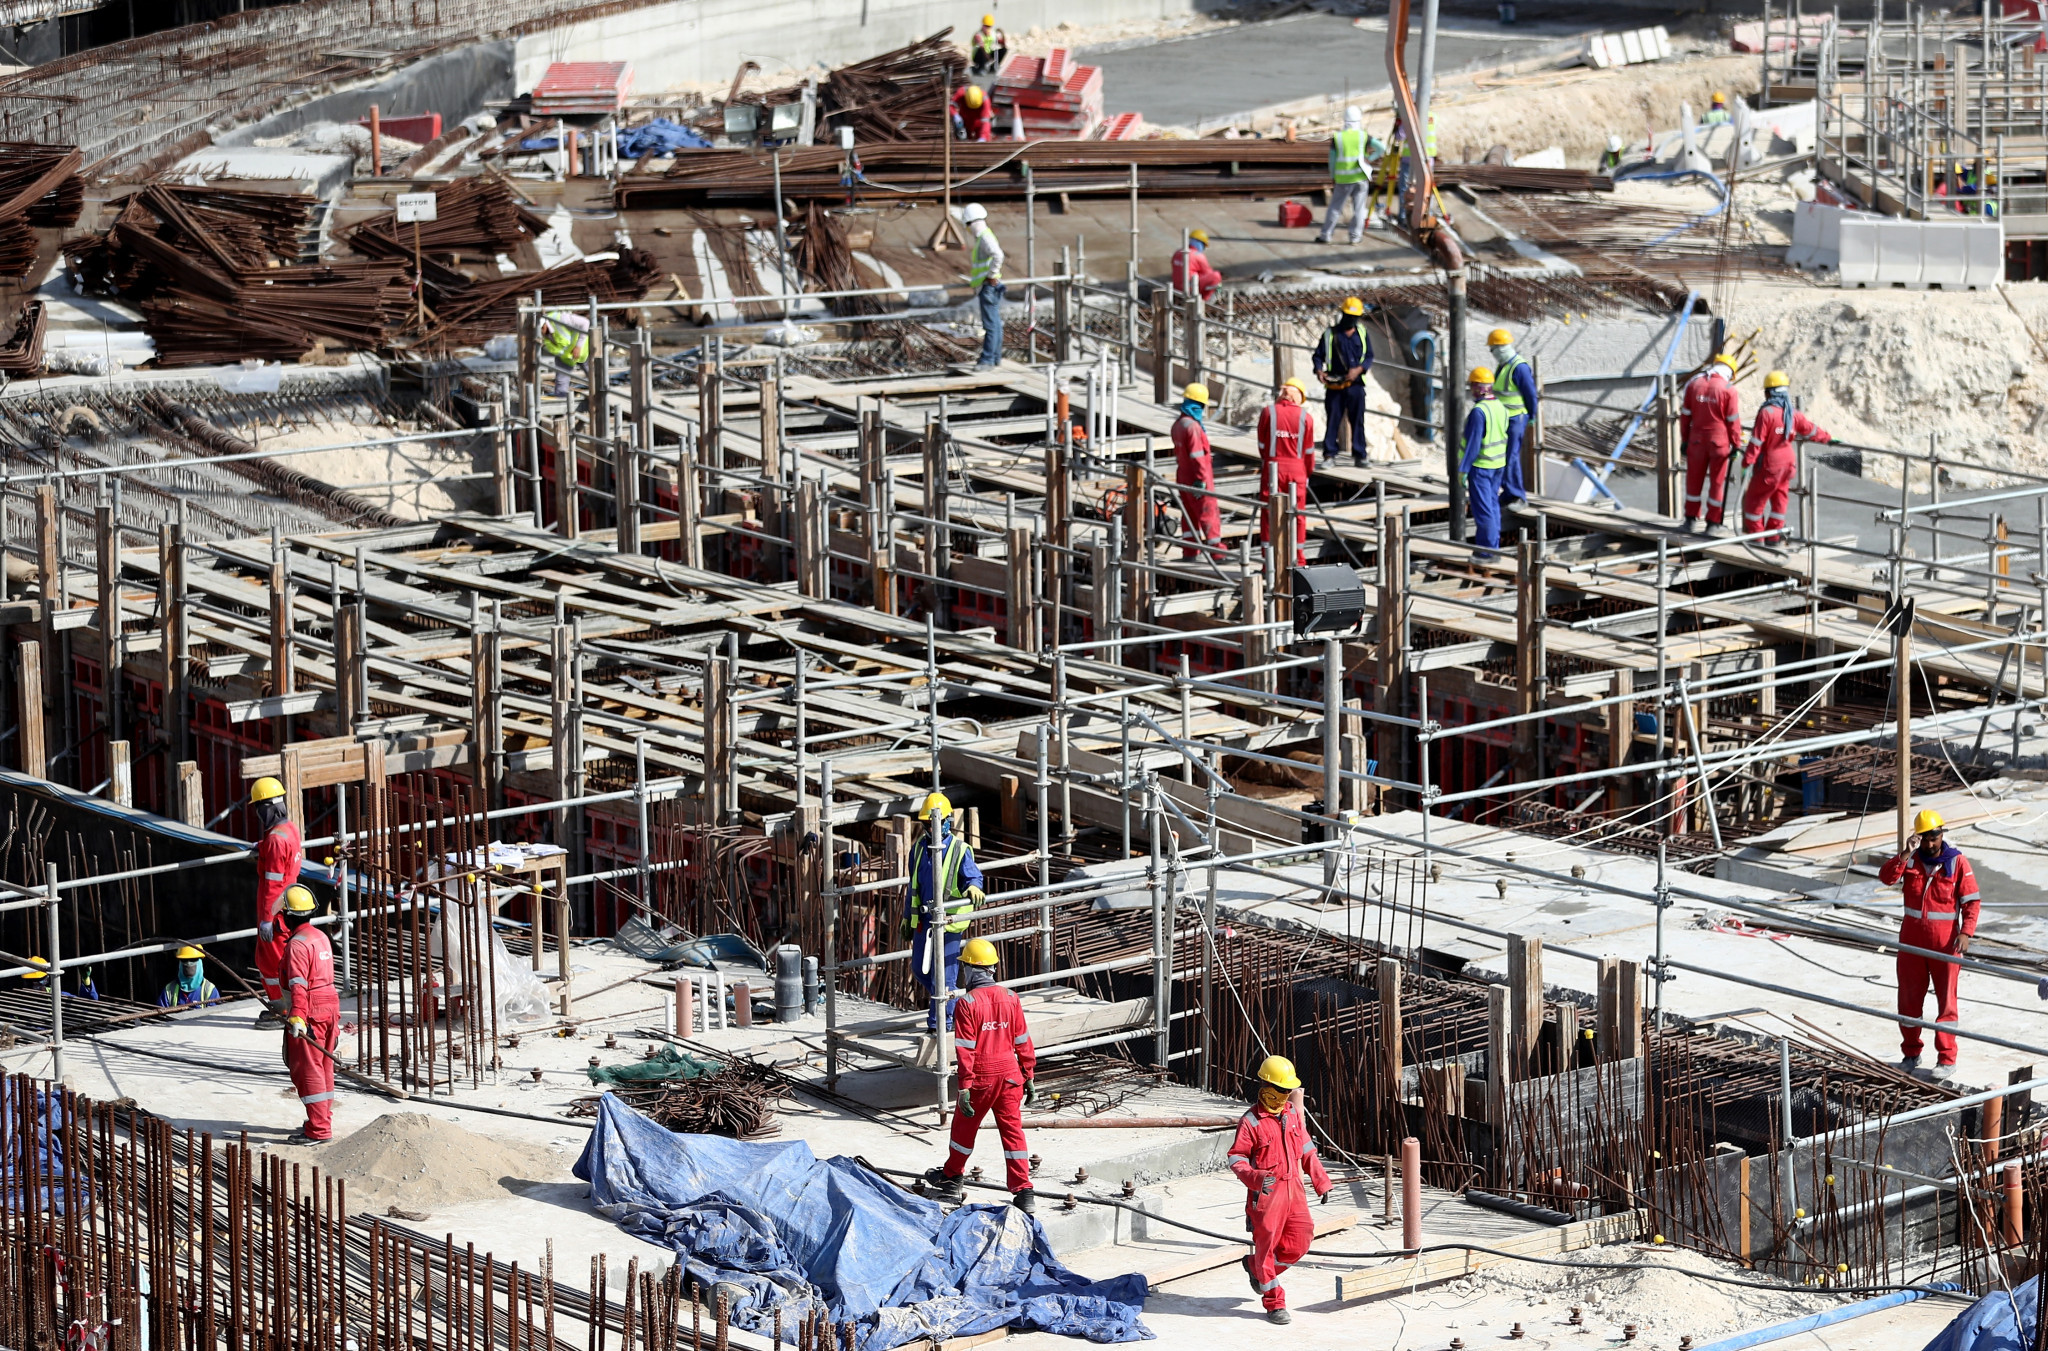 The treatment of migrant workers in Qatar has seen 2022 World Cup organisers receive criticism ©Getty Images